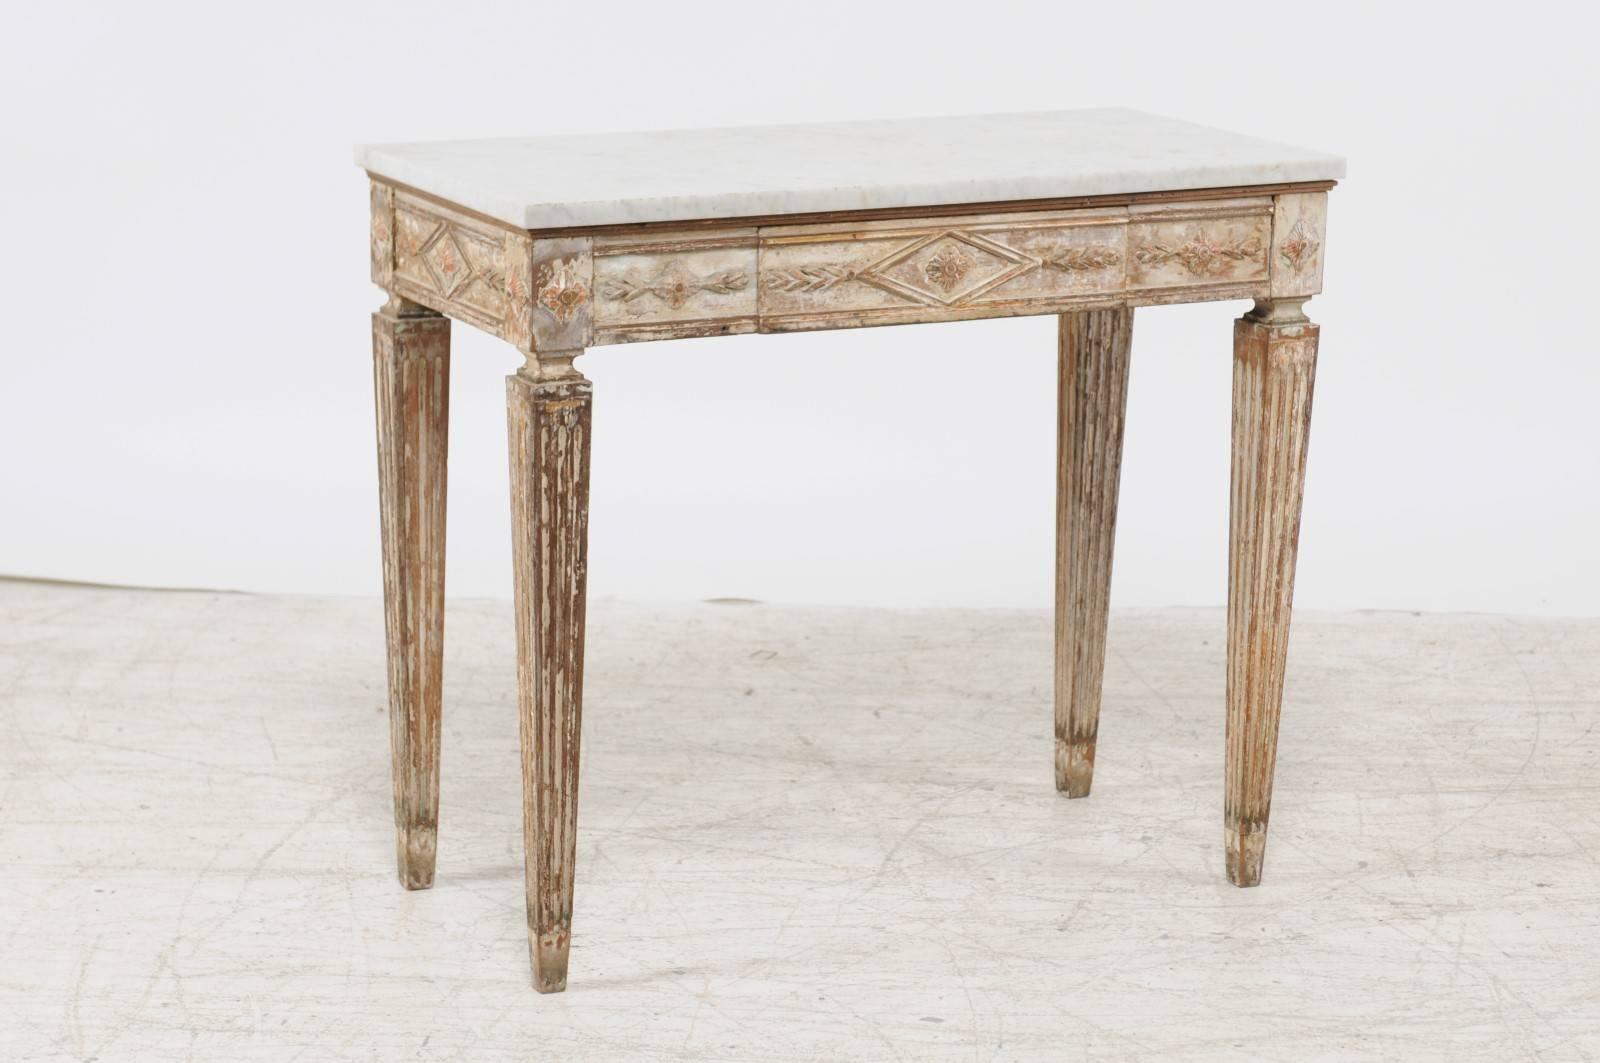 Gilt Swedish Neoclassical Style Console Table with White Marble Top, circa 1870